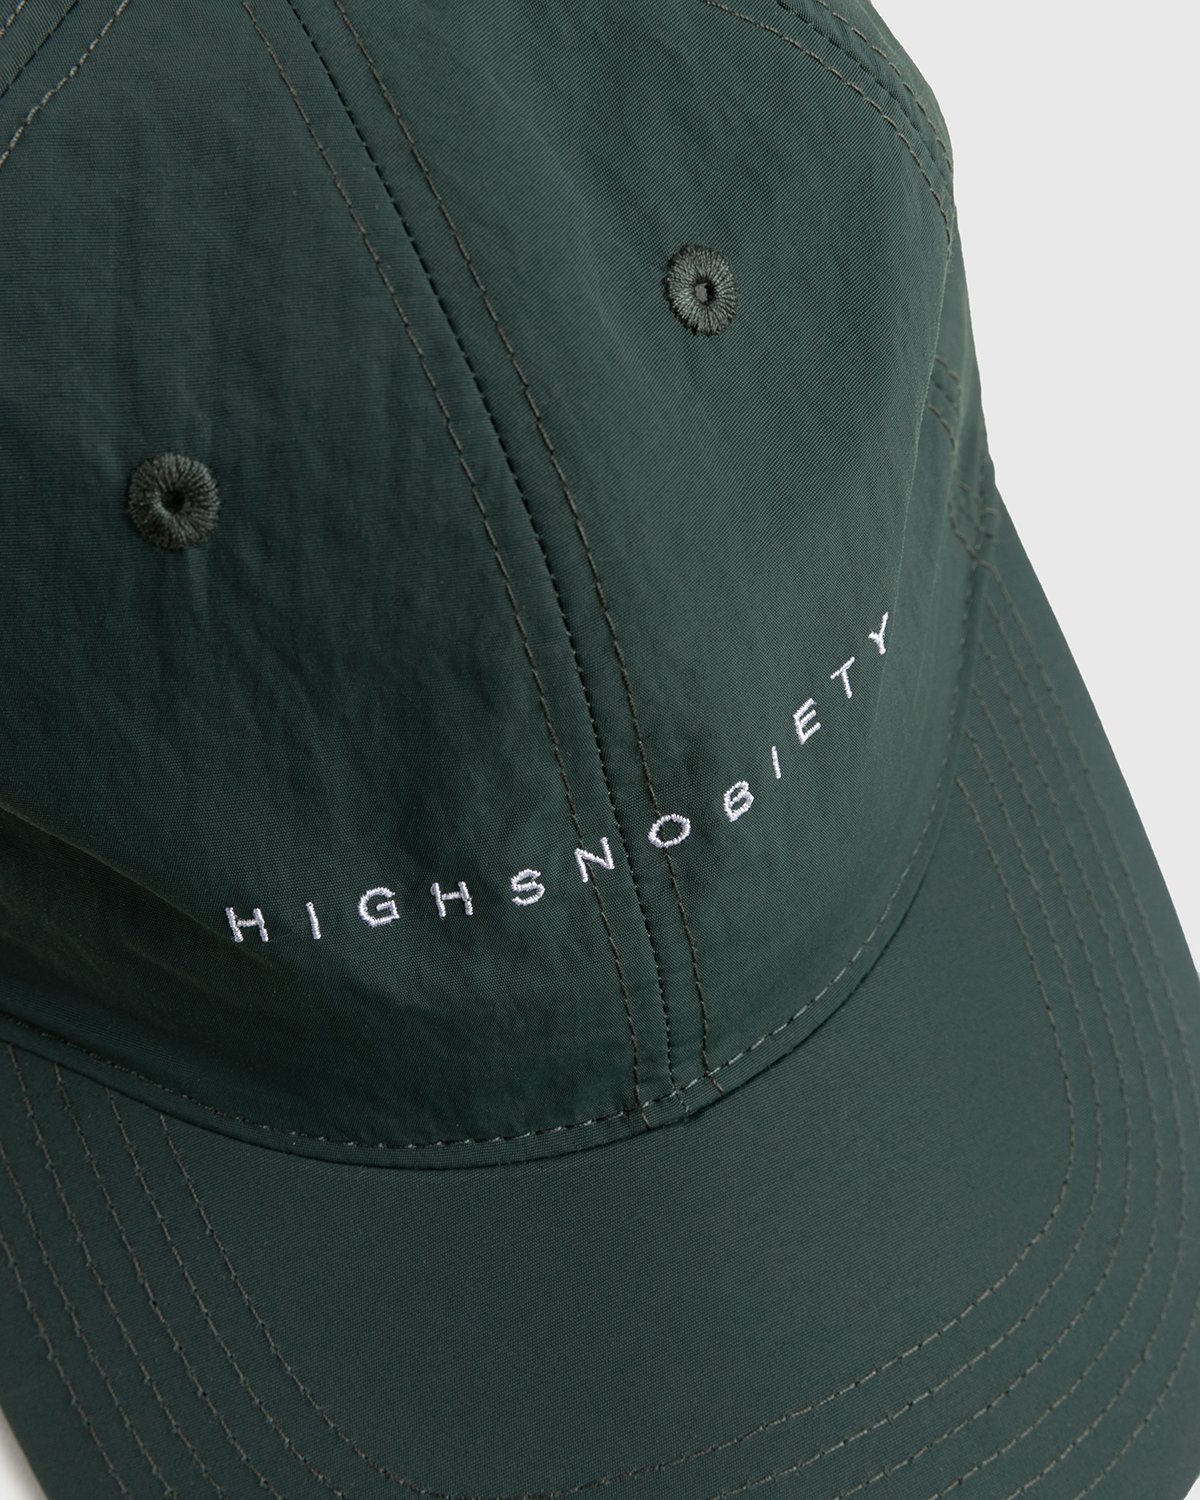 Highsnobiety - Brushed Nylon Ball Cap Green - Accessories - Green - Image 5